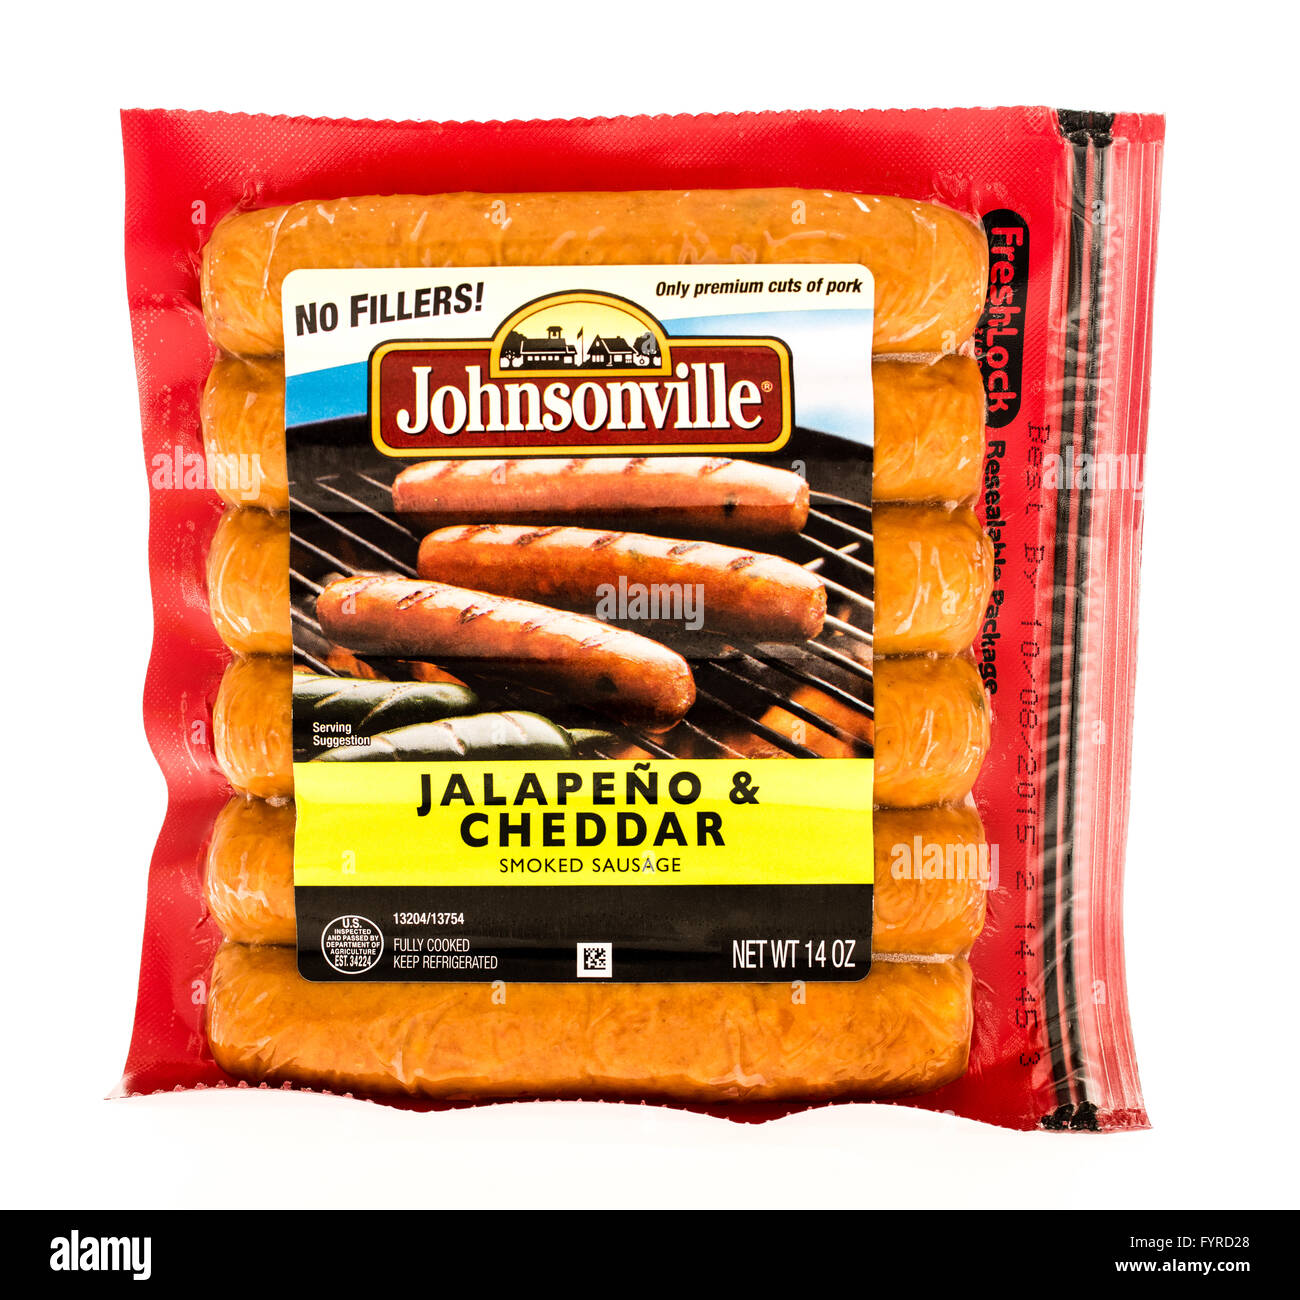 Johnsonville Flame Grilled Fully Cooked Italian Sausage, 14 oz